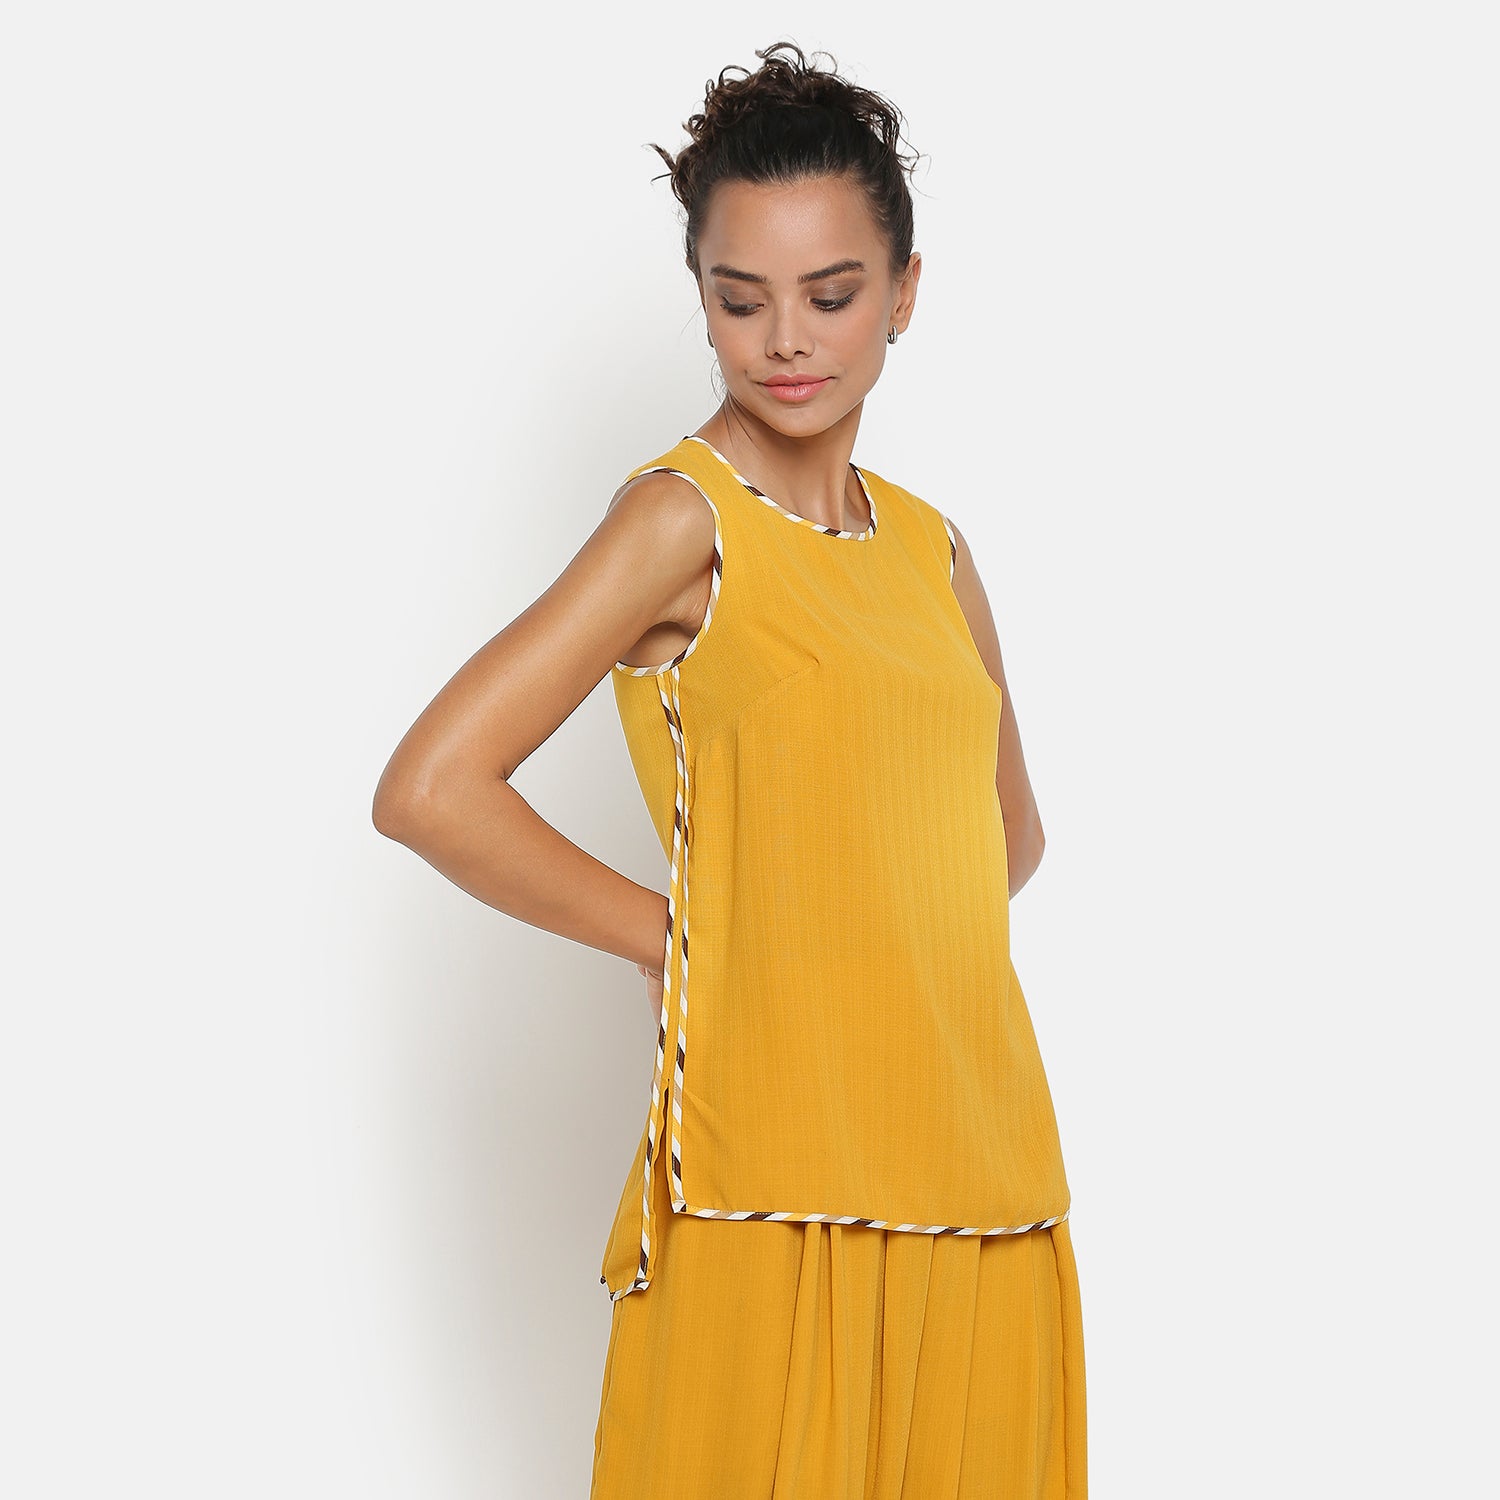 Yellow Sleeveless Top With Contrast Piping